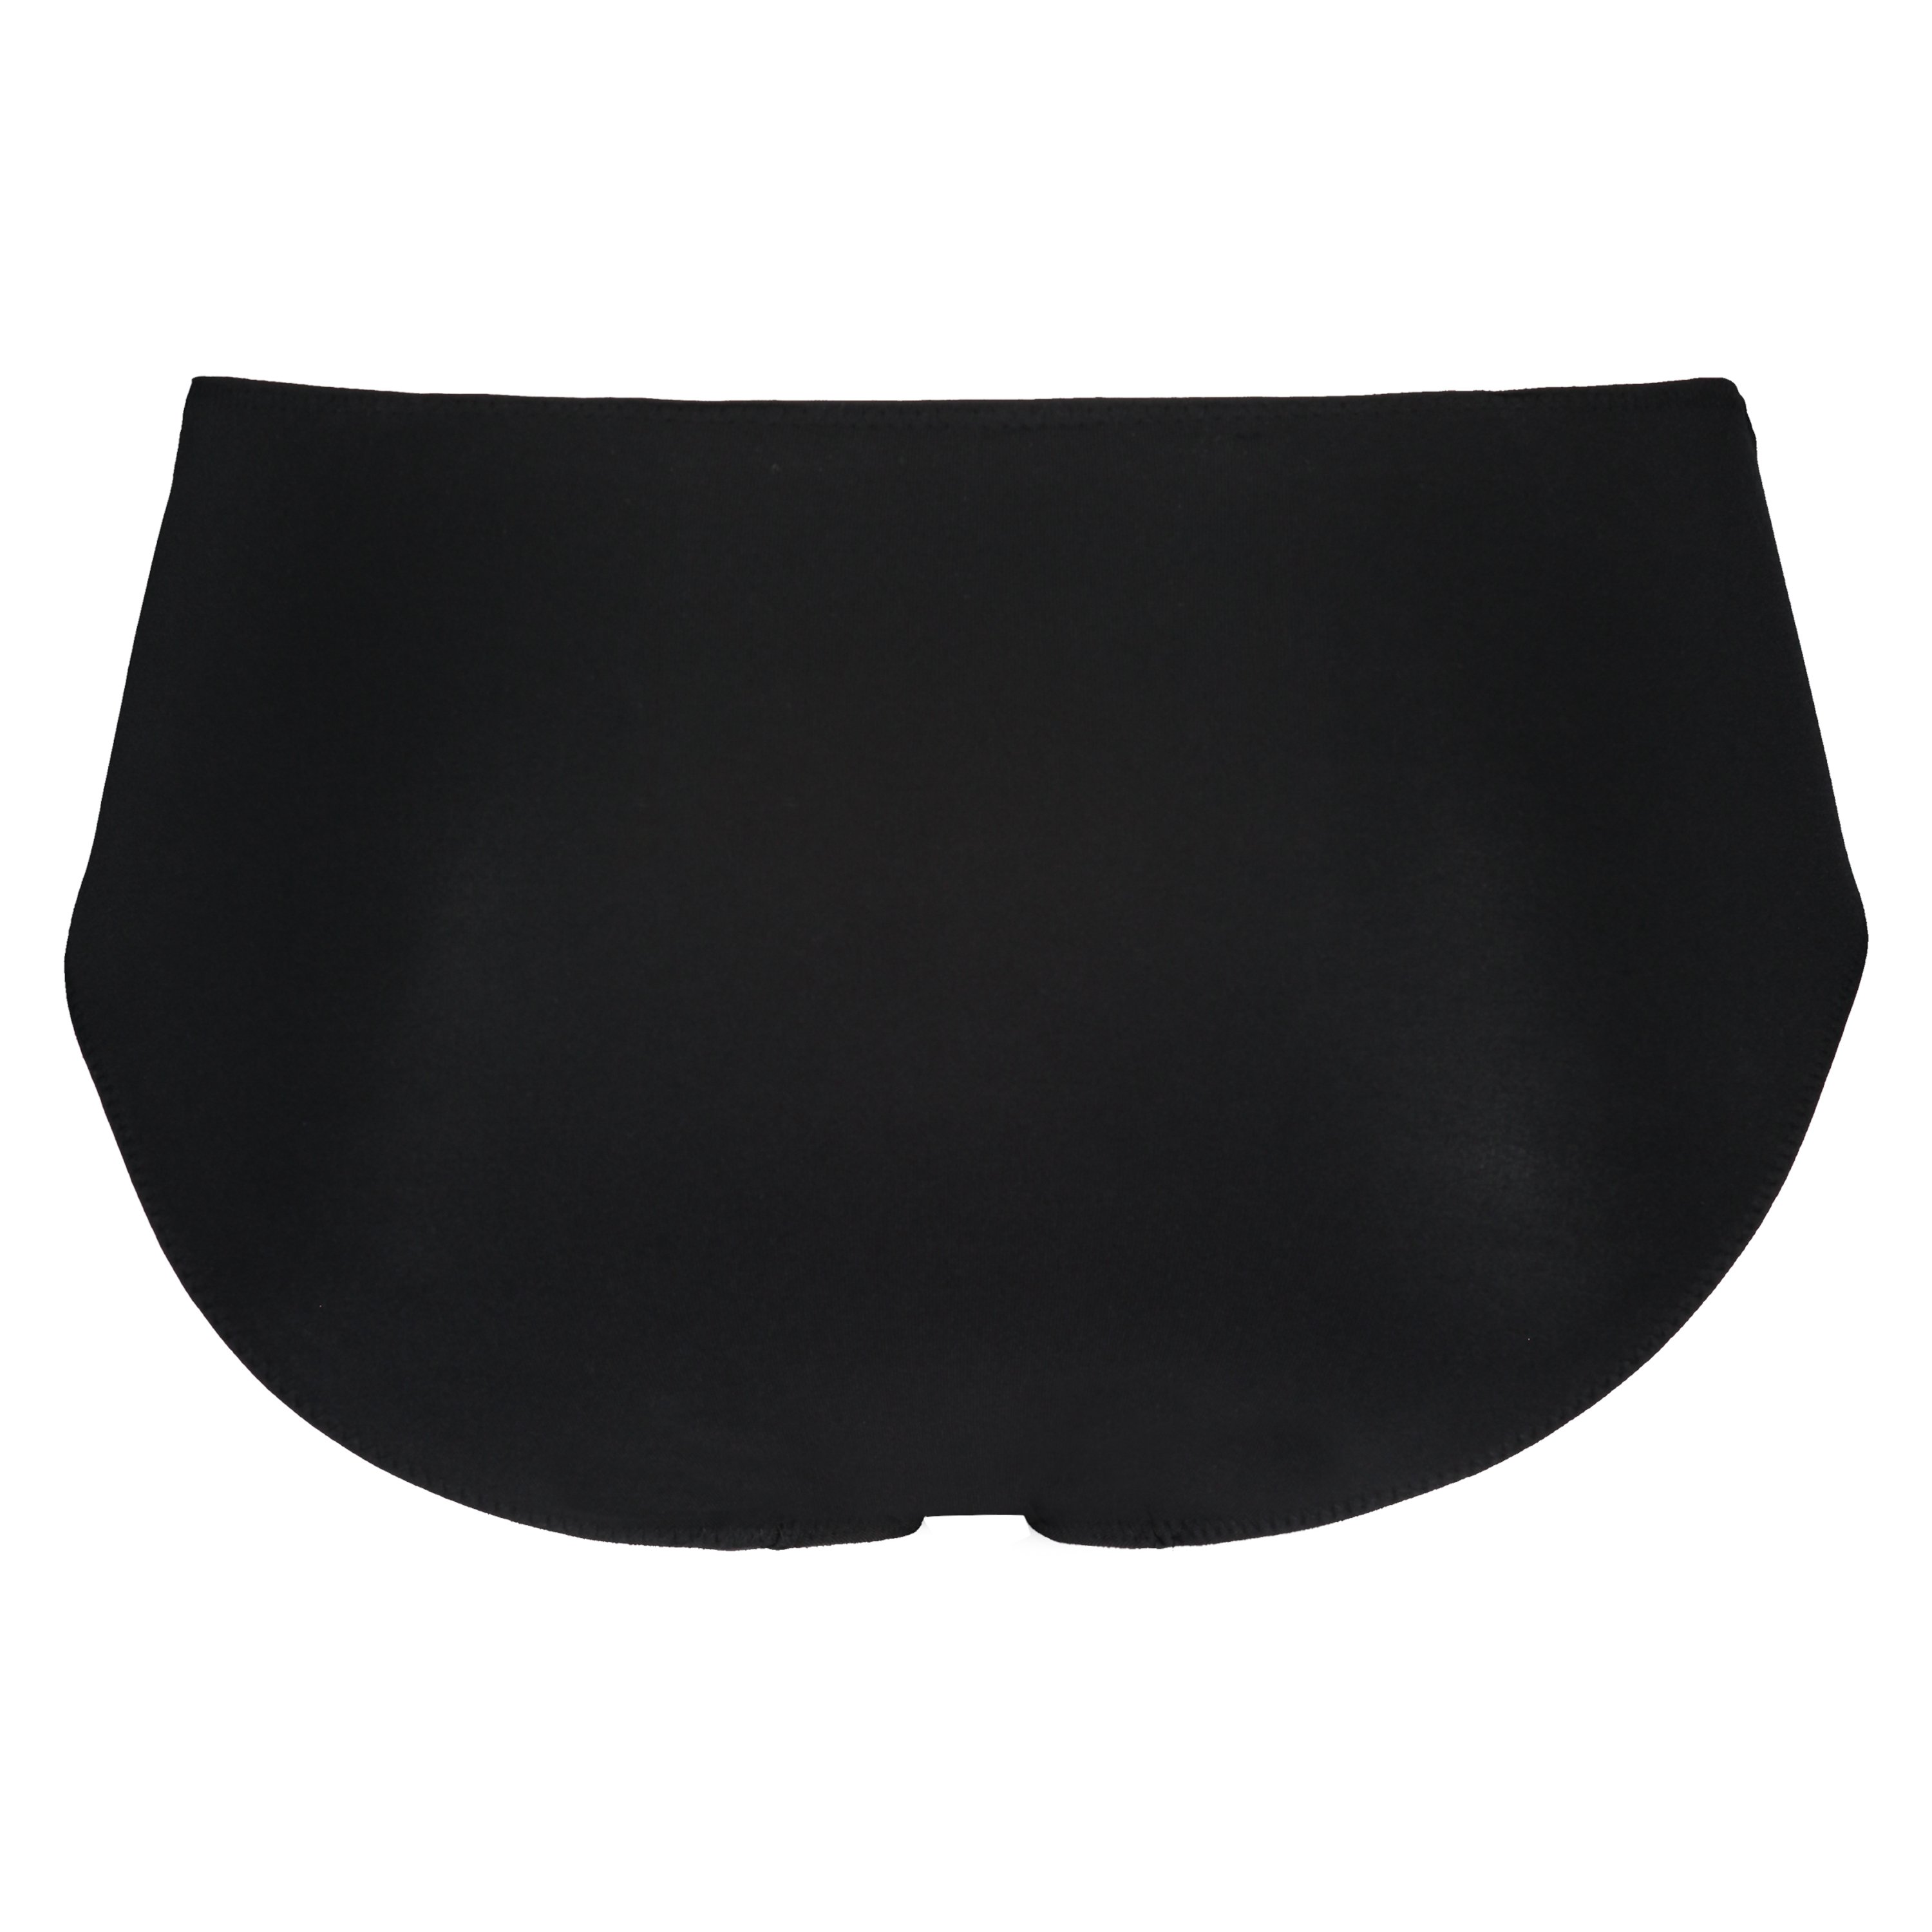 Sophie high knickers, Black, main